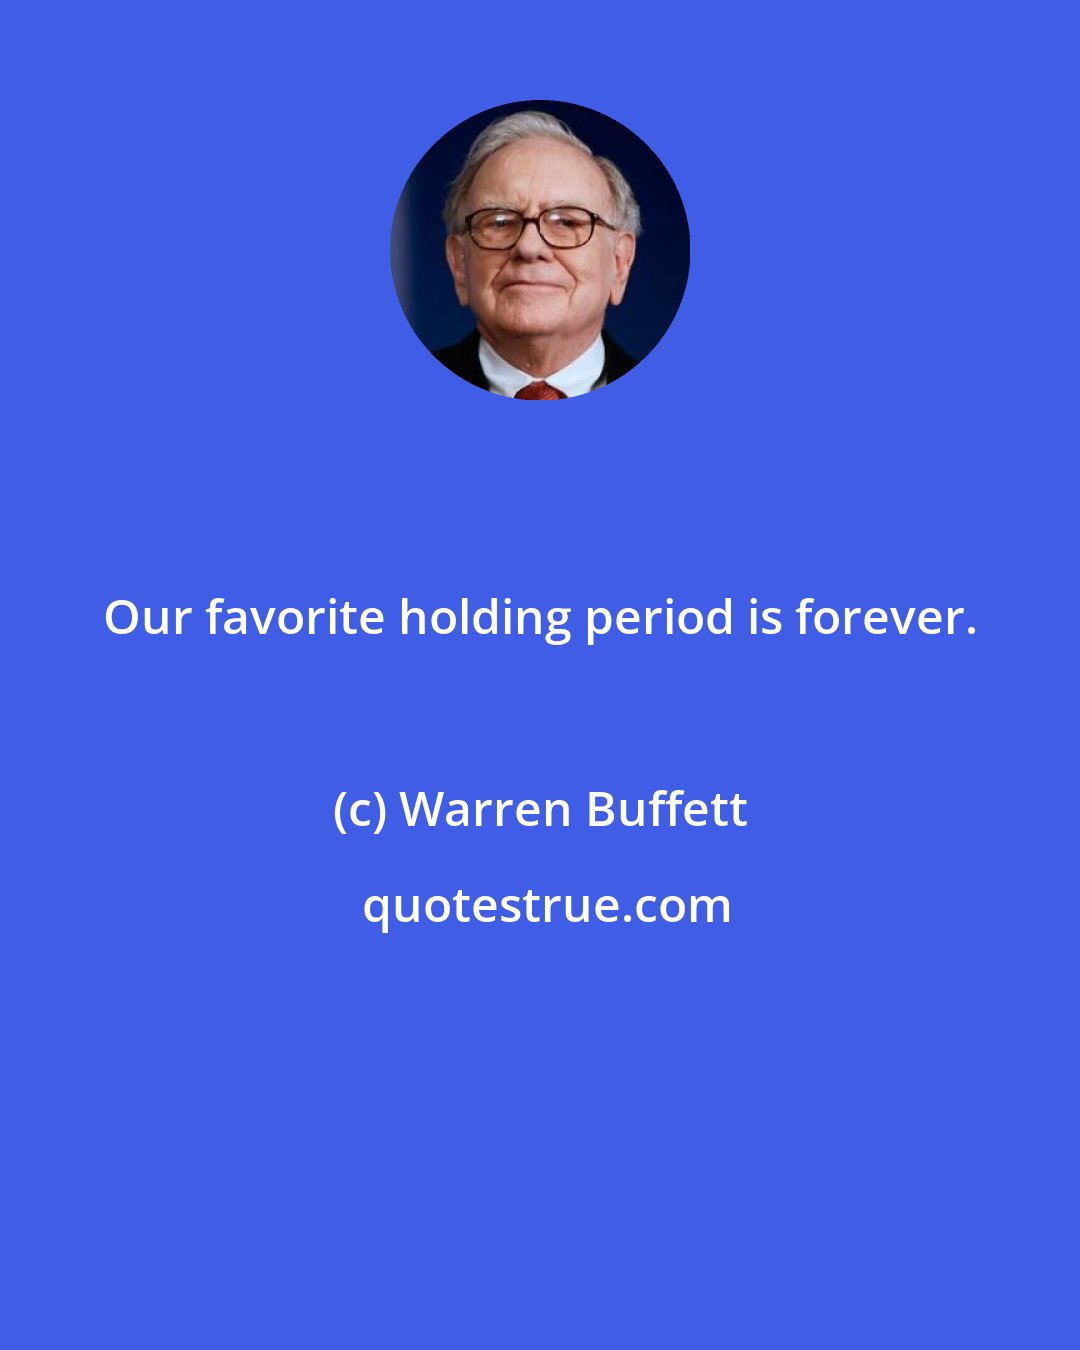 Warren Buffett: Our favorite holding period is forever.